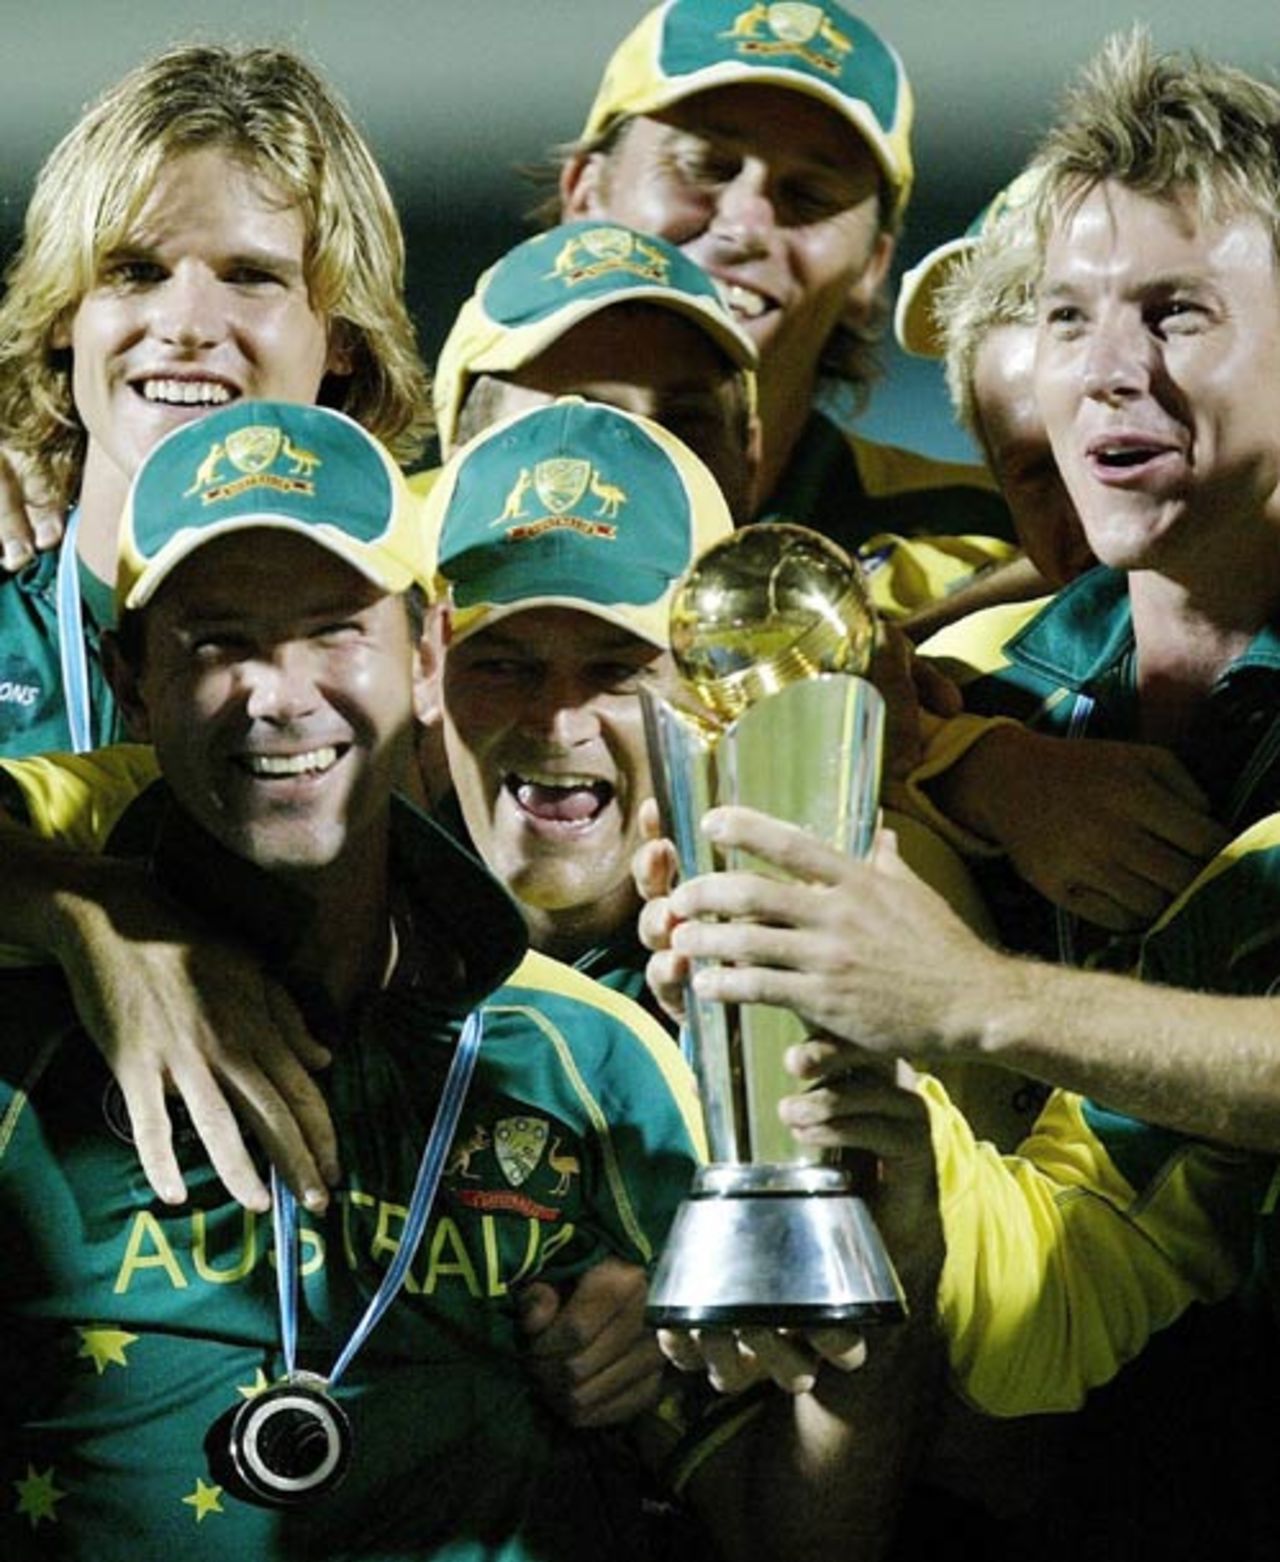 The wait is over: Australia win the Champions Trophy for the first time West Indies v Australia, Champions Trophy final, Mumbai, November 5, 2006